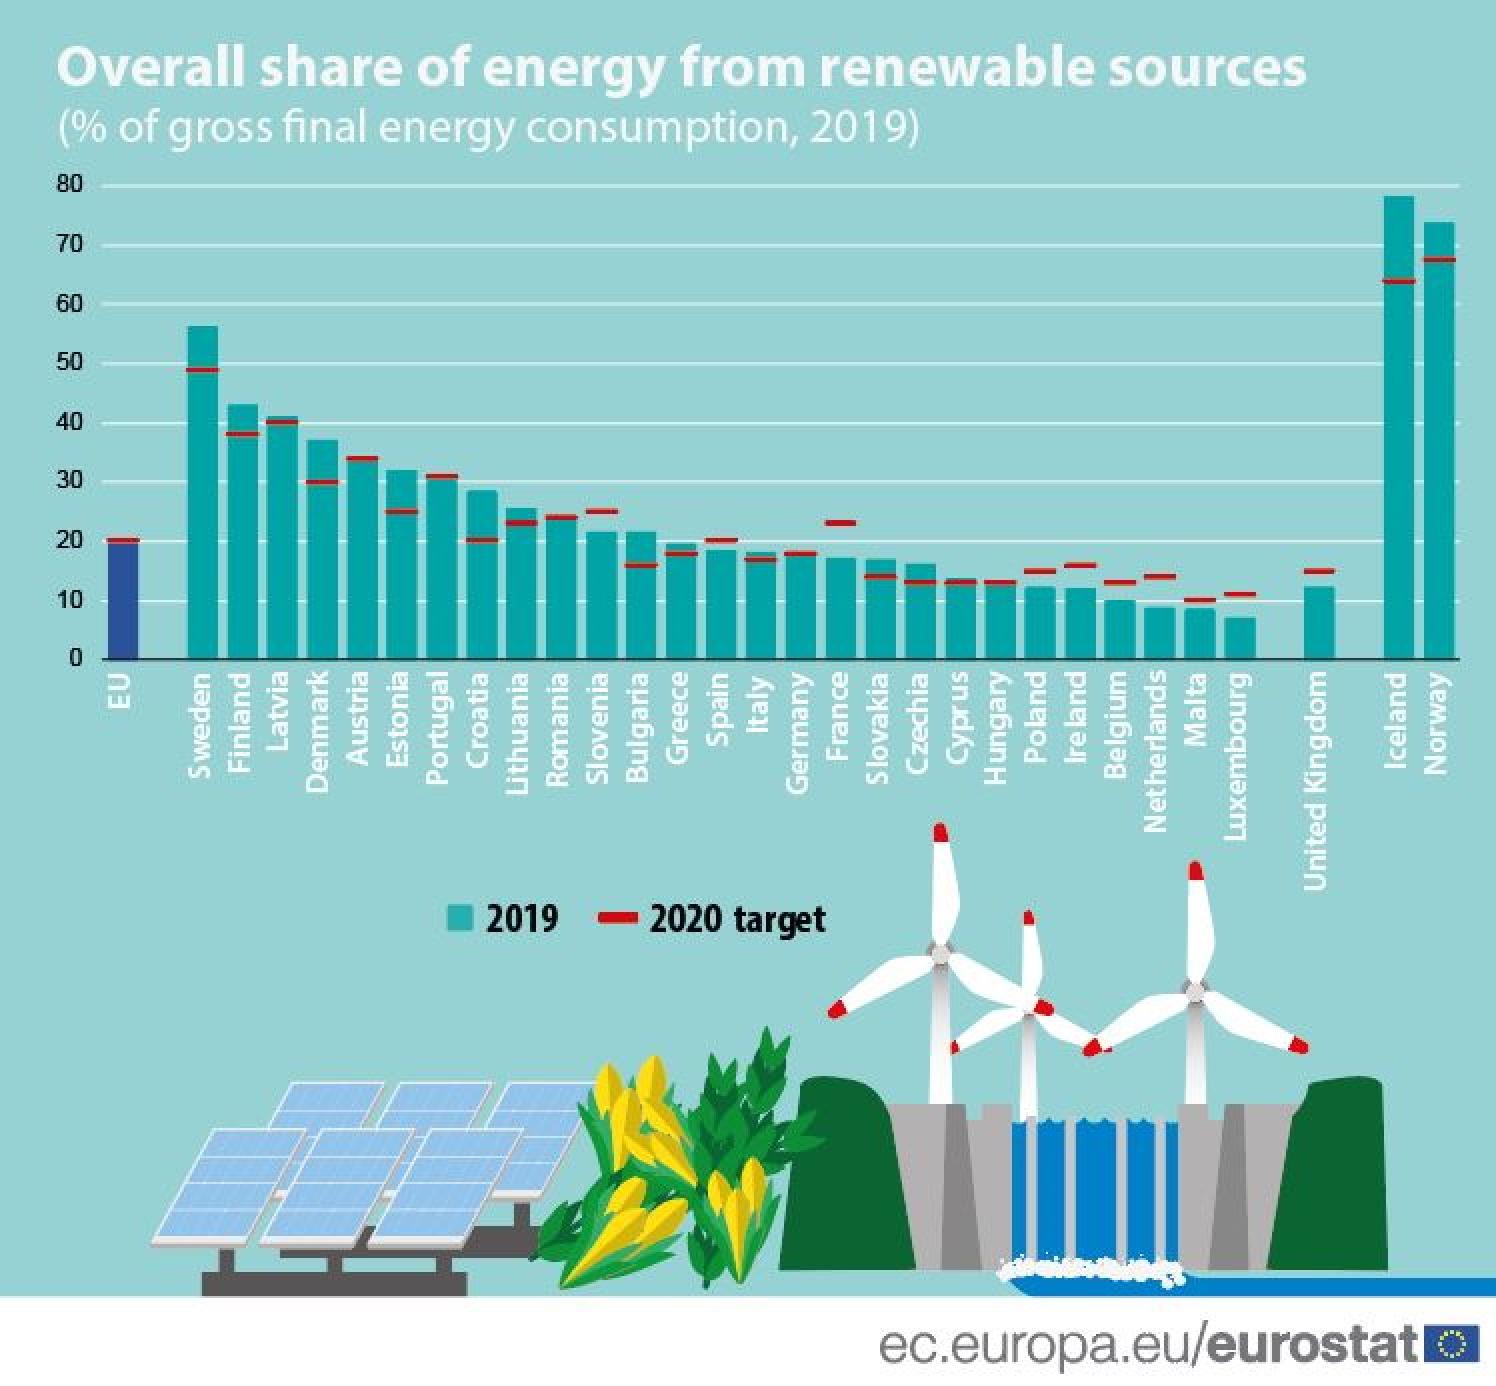 Overall share of energy from renewable sources in EU